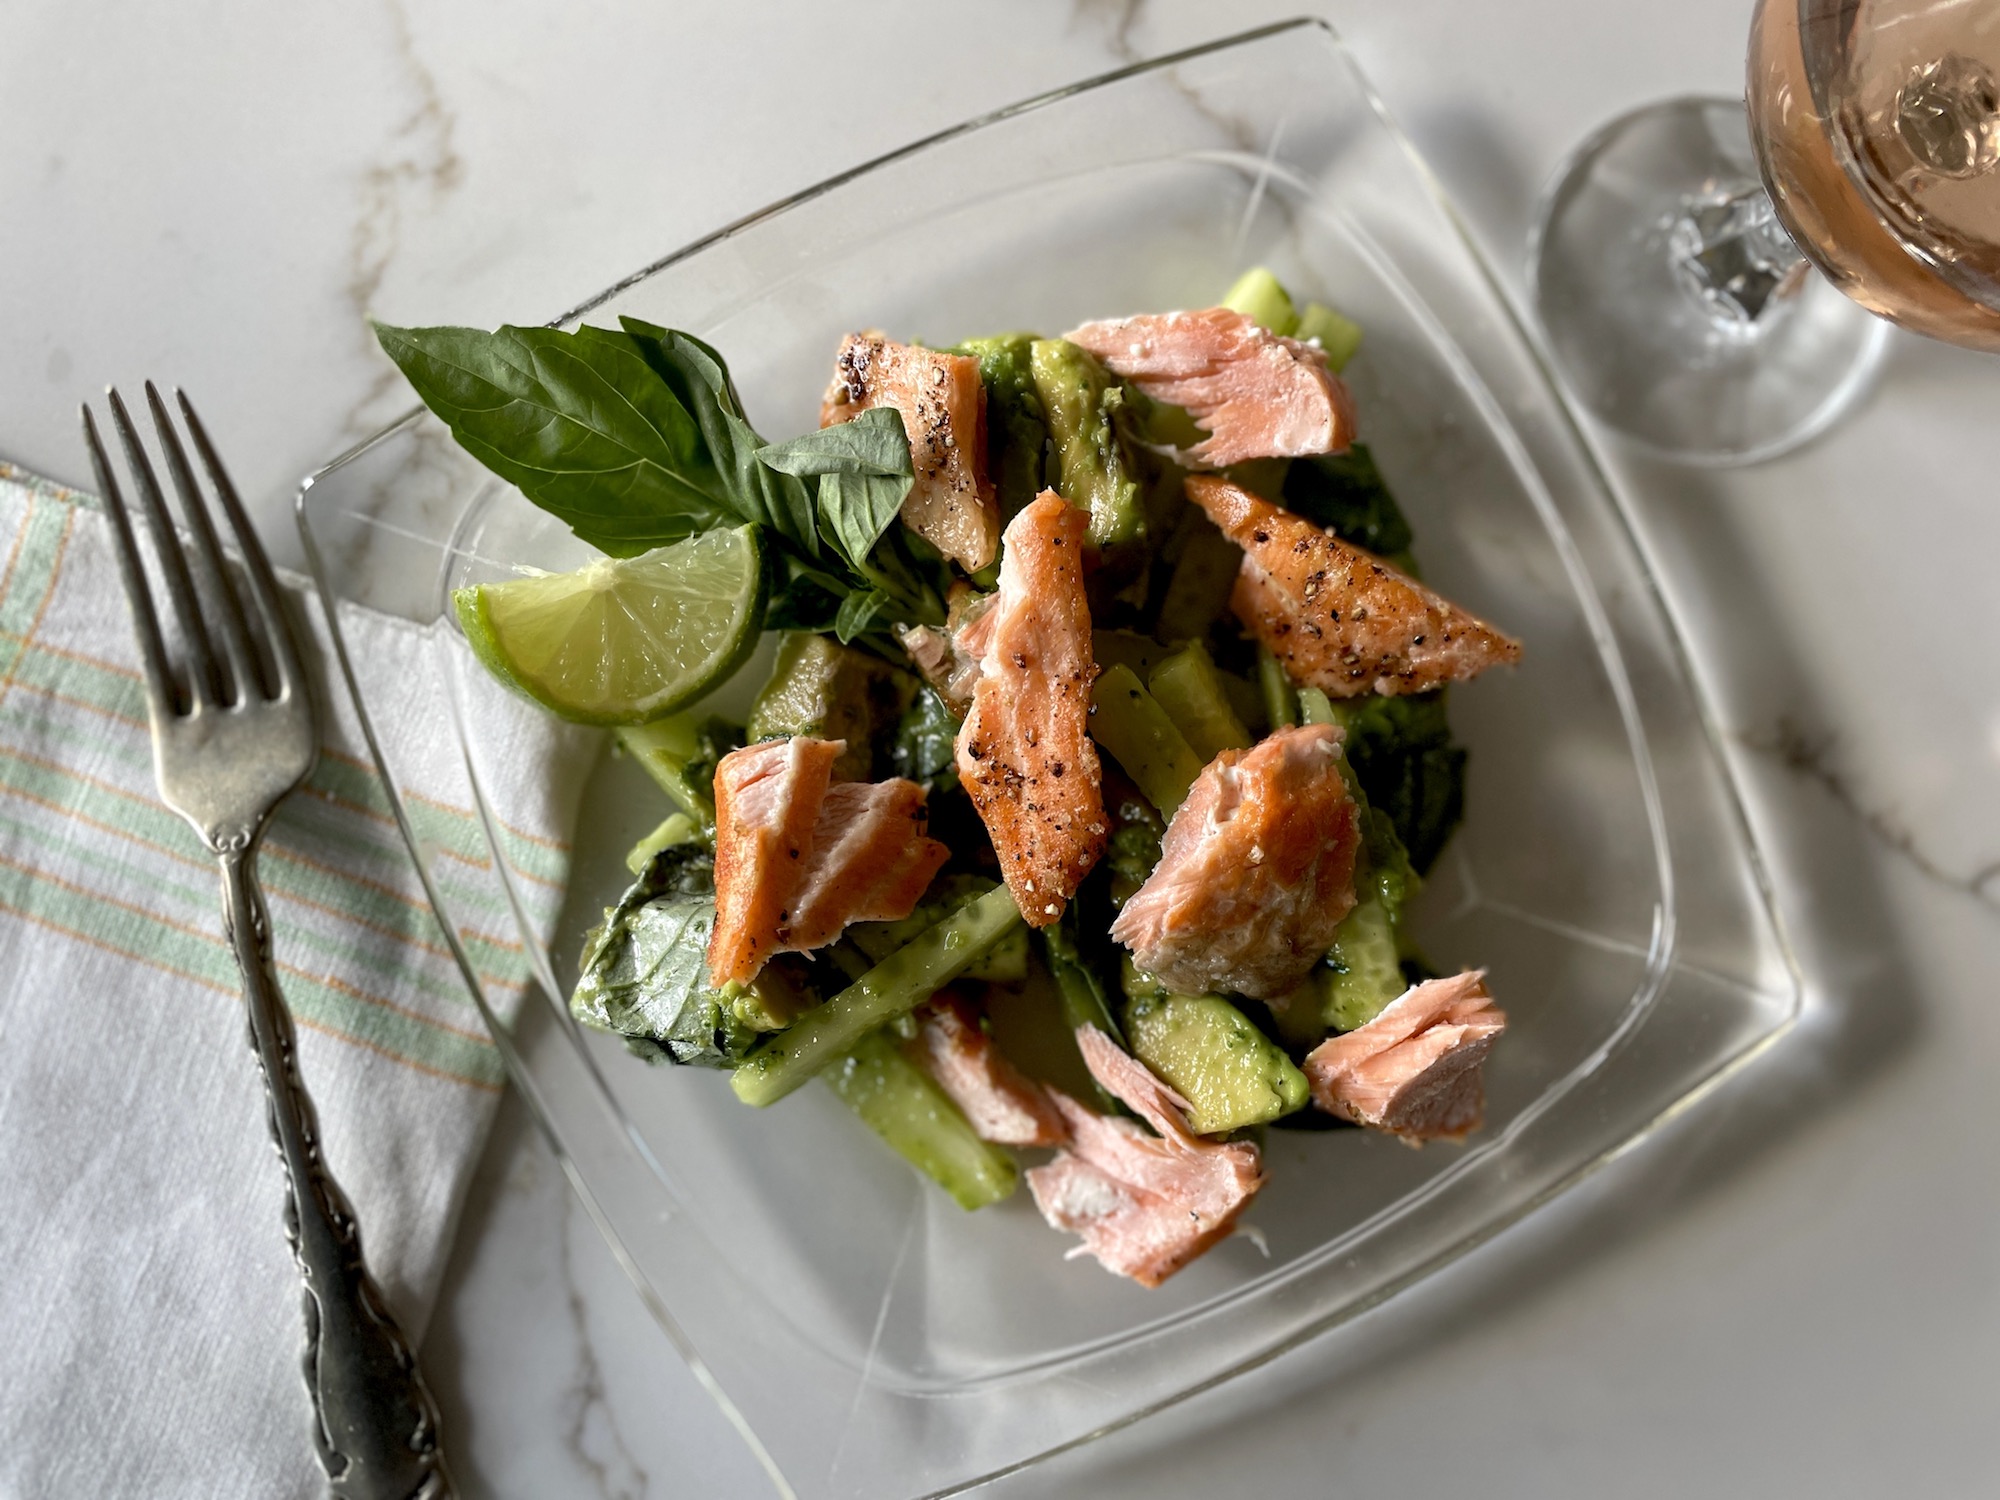 A Delicious-Start-to-Summer Salad: Salmon w/Avocado & Cucumber dressed with Basil Vinaigrette